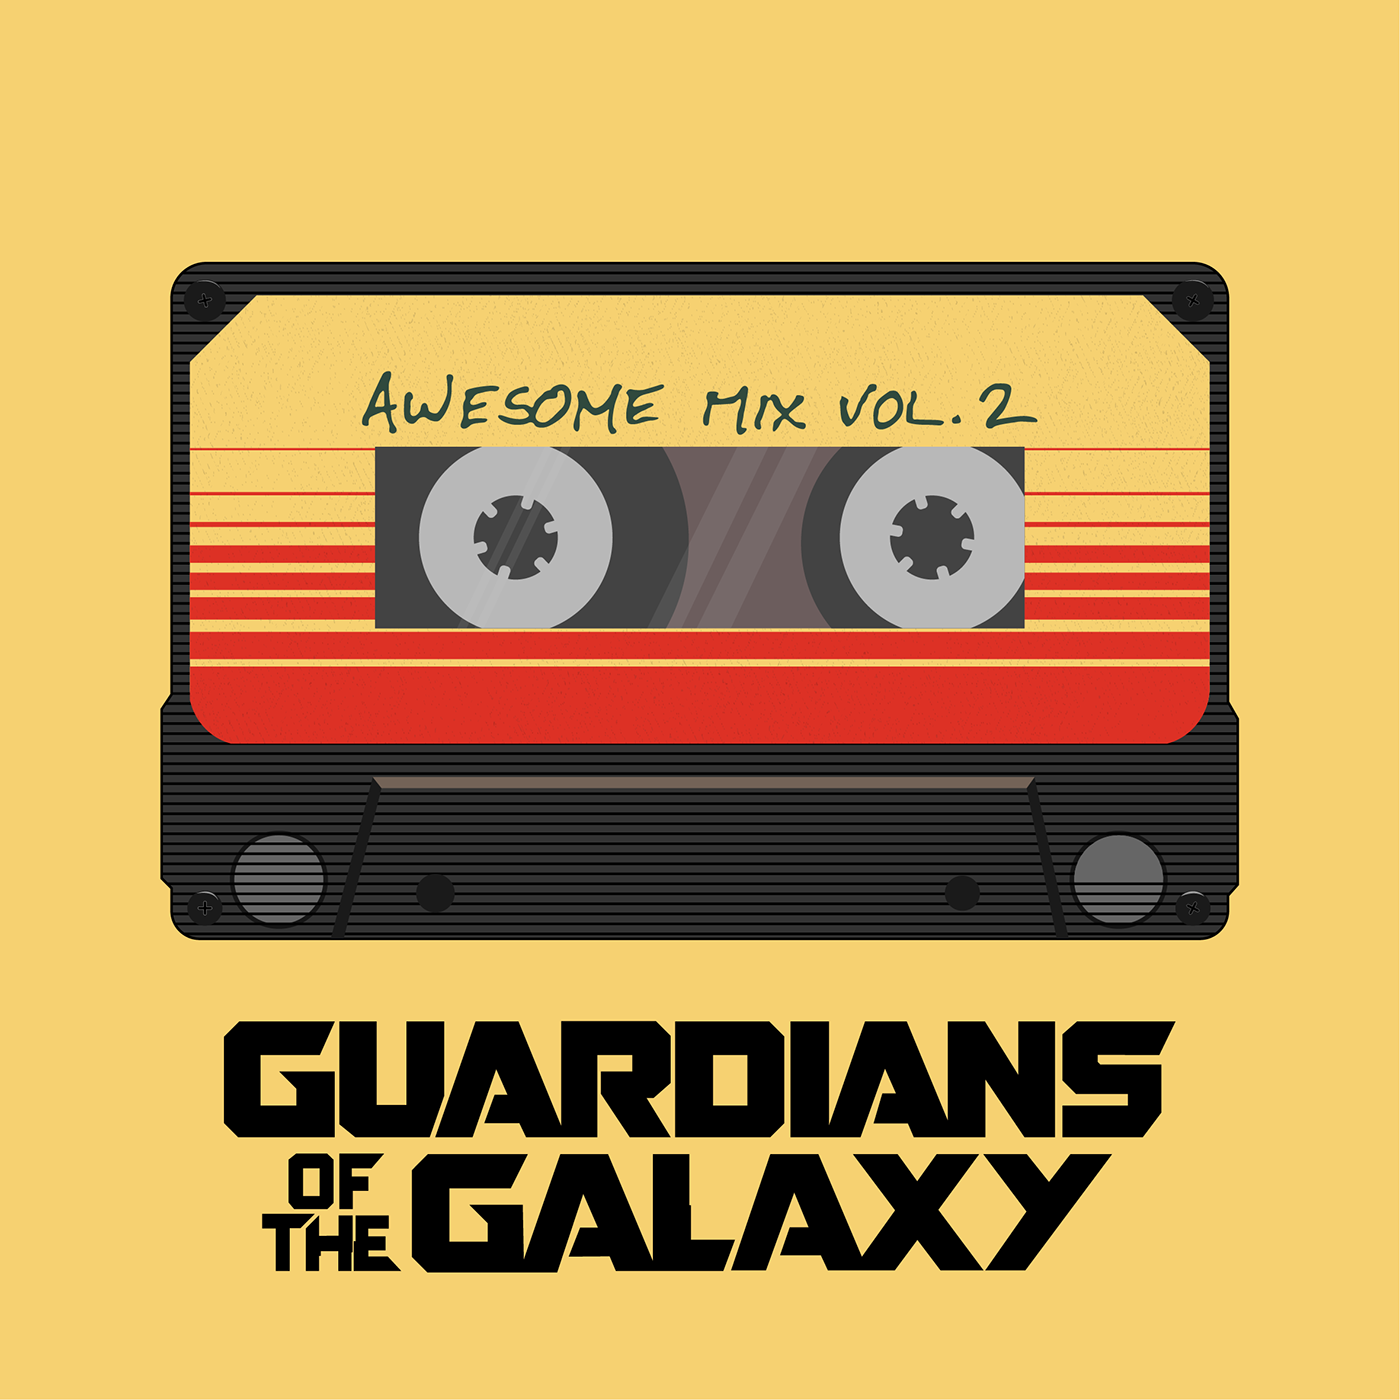 Guardians of the galaxy - Awesome mix vol. 2 on Behance